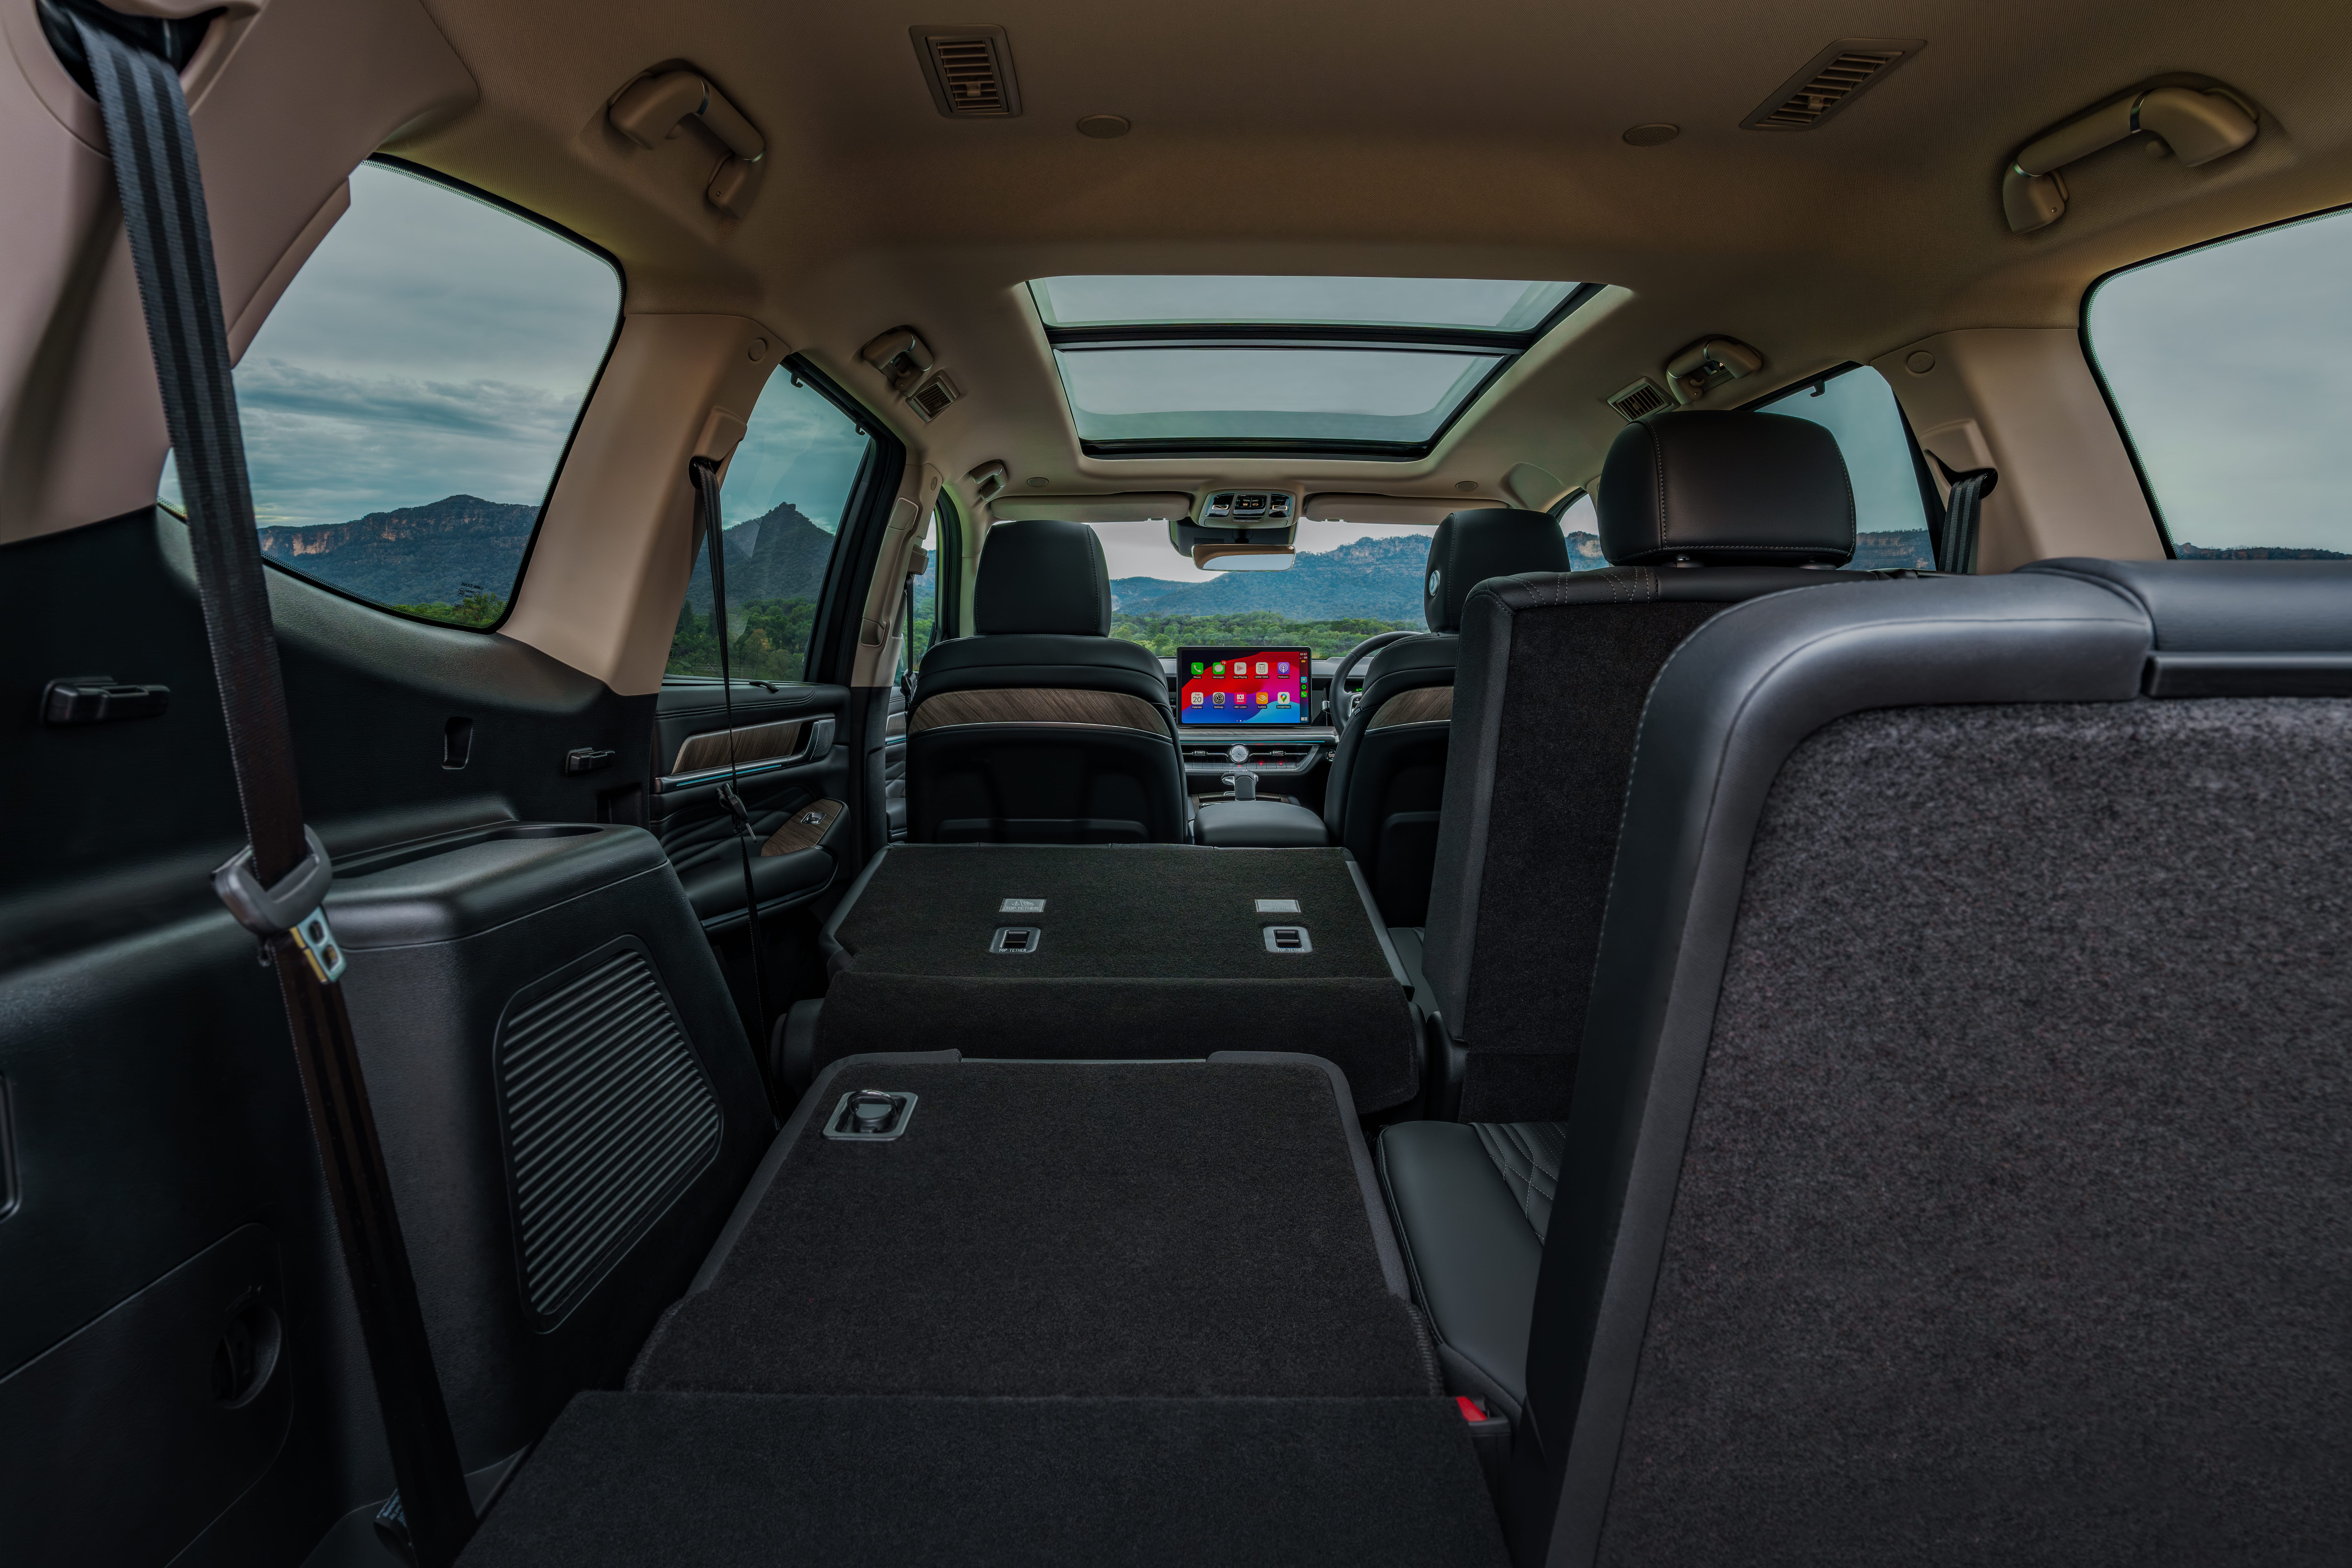 7-Seat comfort and sophistication